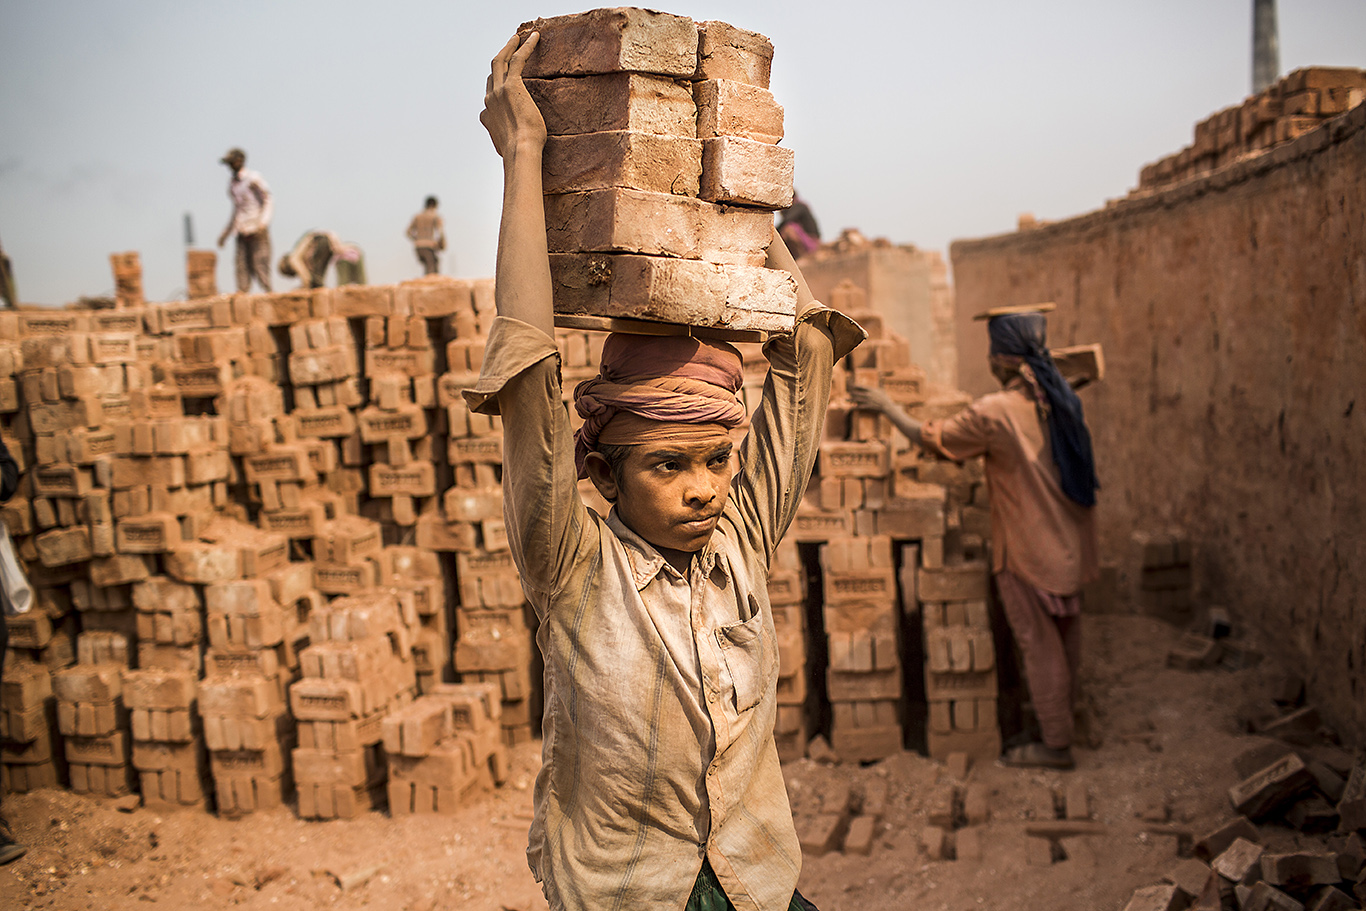 An underage boy works carrying bricks on his head in Ashulia area on the outskirts of Dhaka, Bangladesh. There are thousands of brick fields in Bangladesh where workers slog long hours to churn out millions of bricks to fuel a construction boom in the country. Dhaka has been named, according to several reports, the worst city in the world to live in.